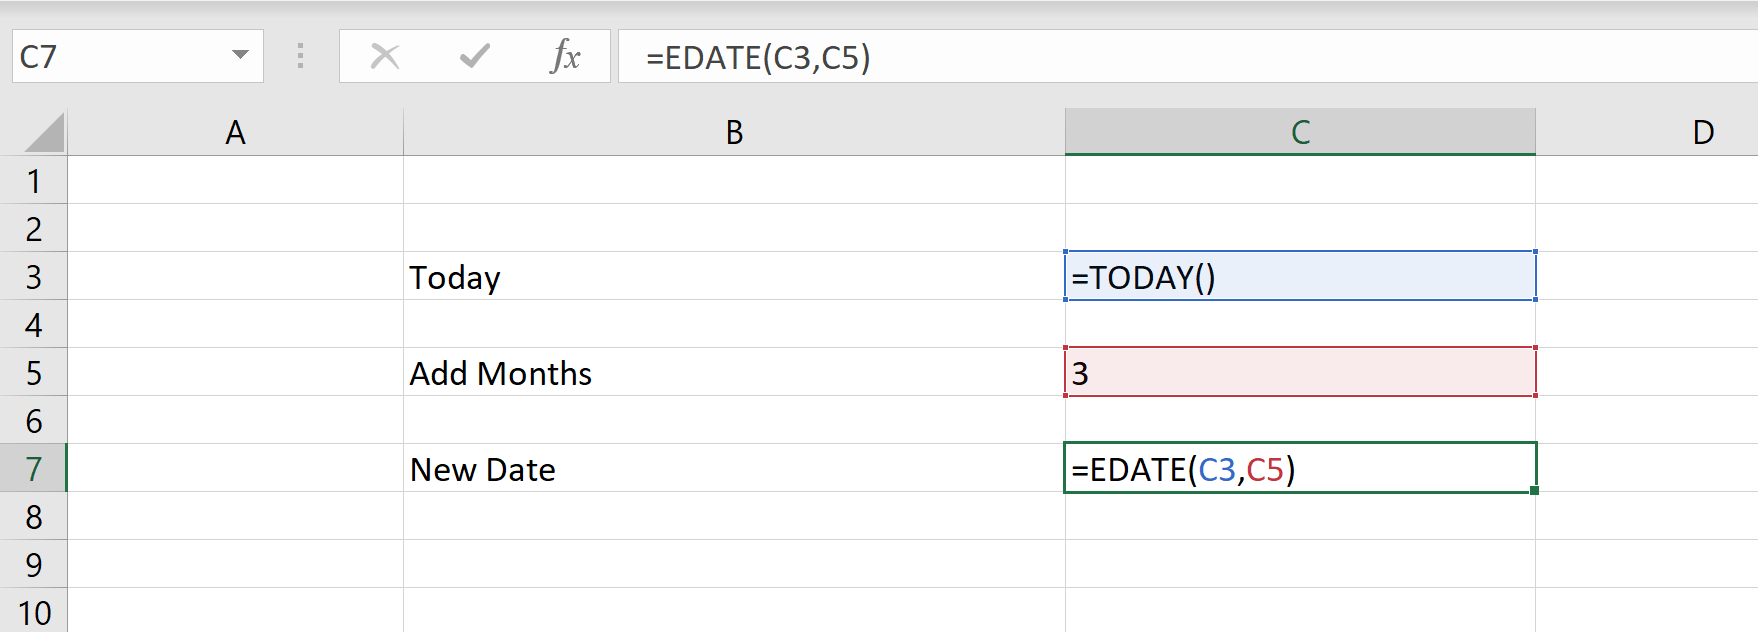 How to Add One Month to a Date in Excel?